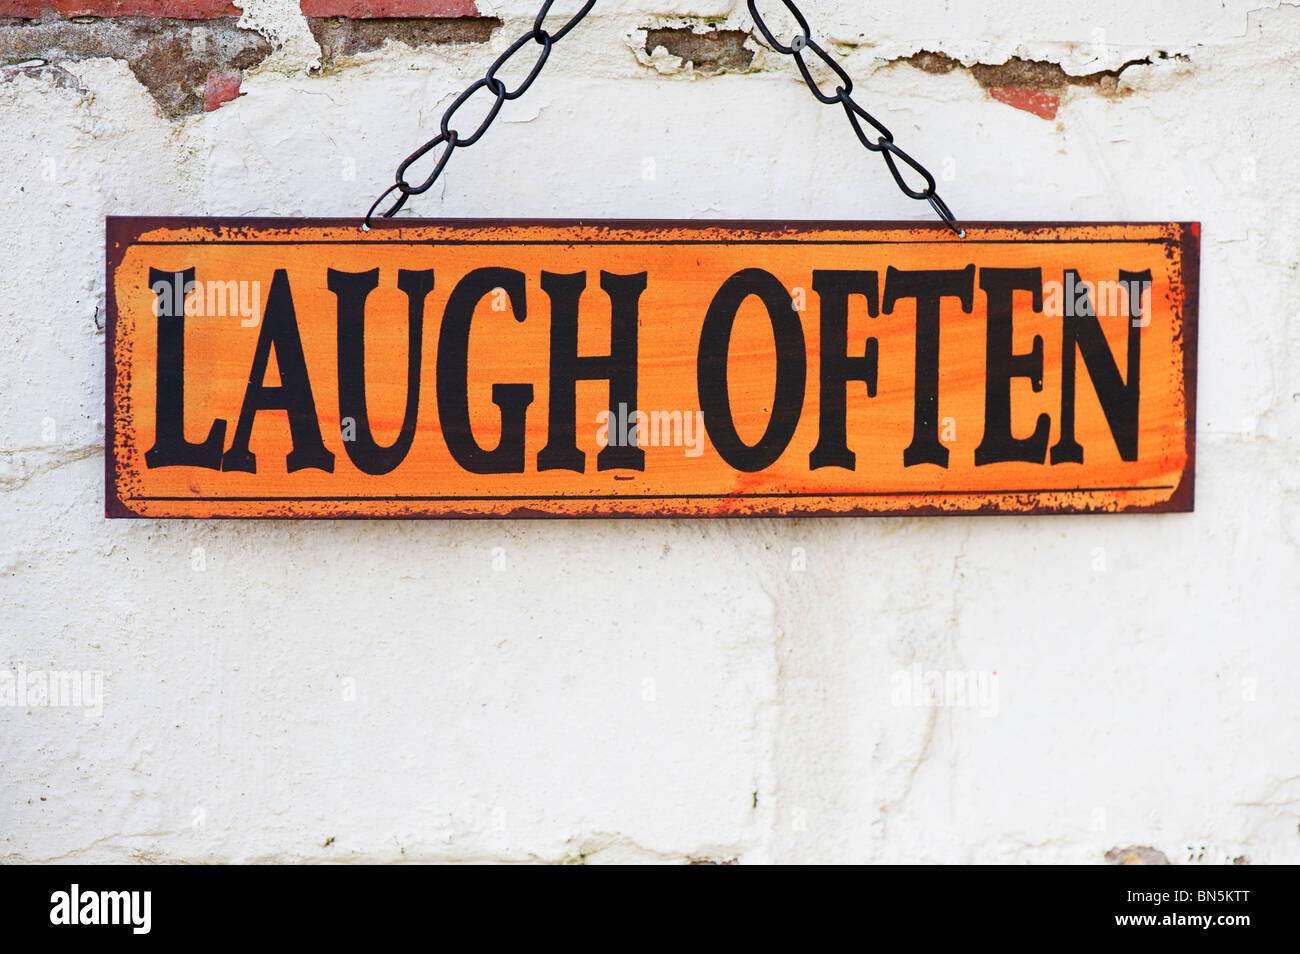 Laugh often. Old metal garden signs on a painted brick wall Stock Photo